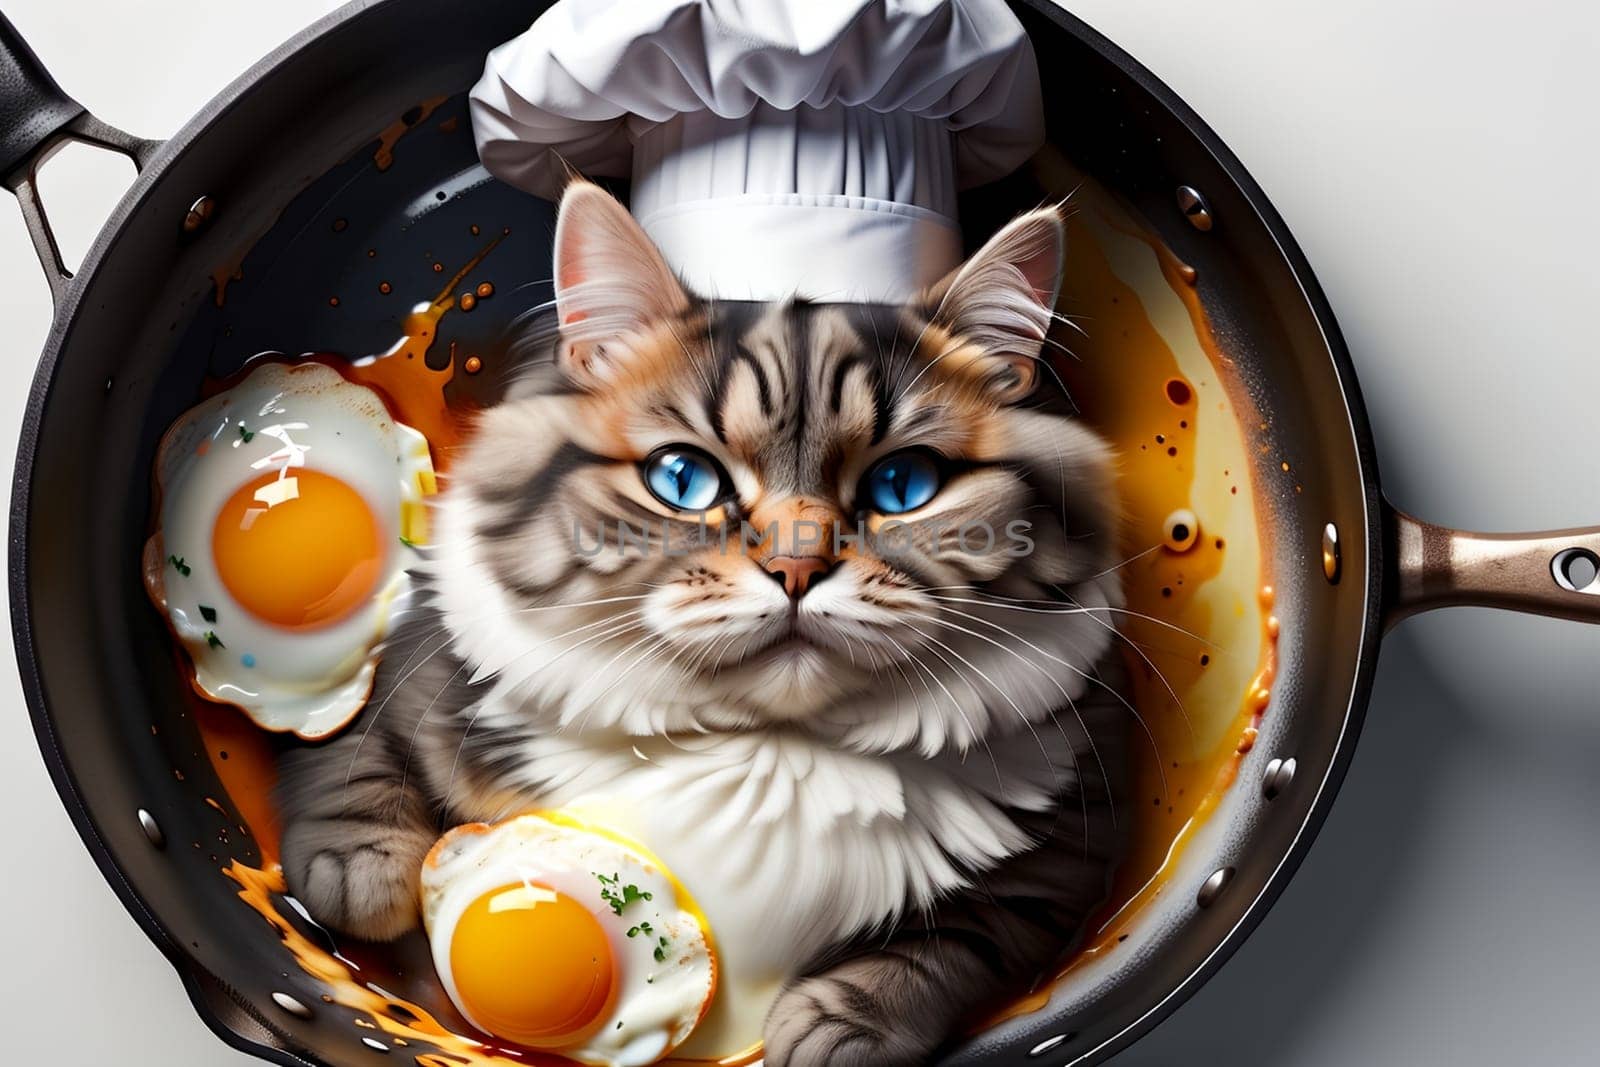 professional chef cat frying scrambled eggs in a frying pan ,view from above